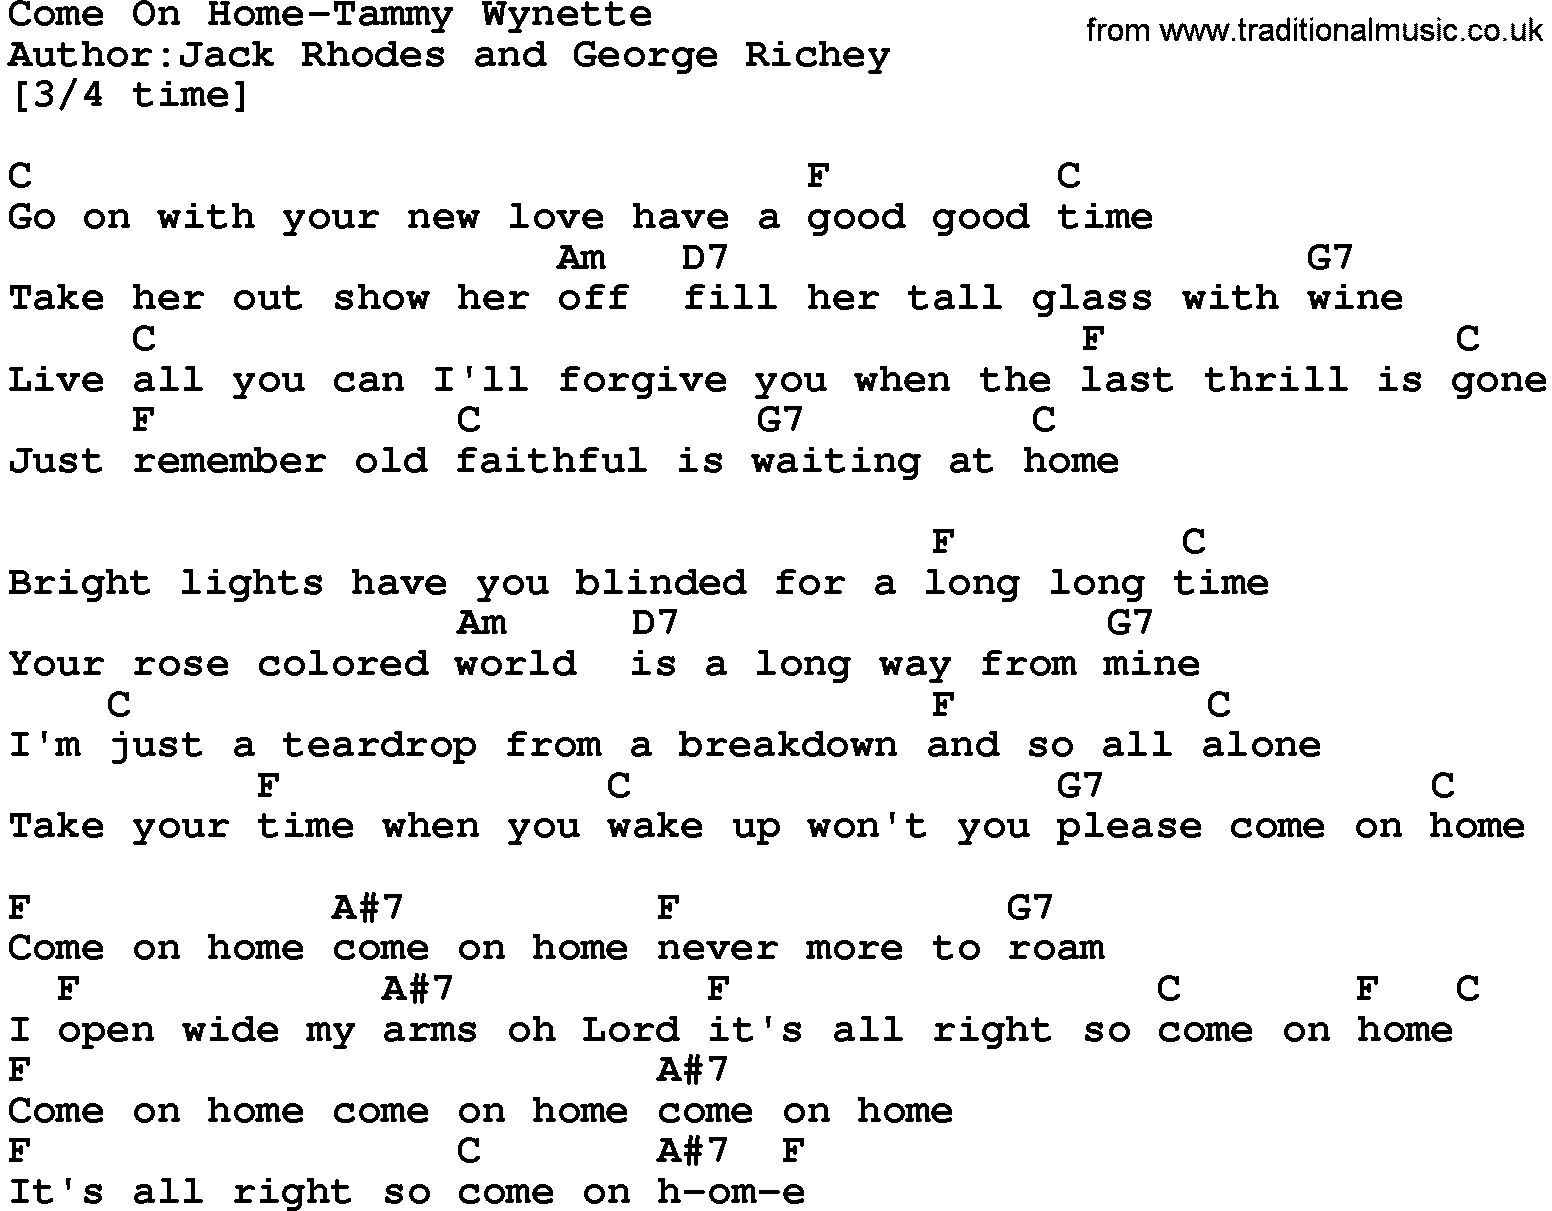 Country music song: Come On Home-Tammy Wynette lyrics and chords